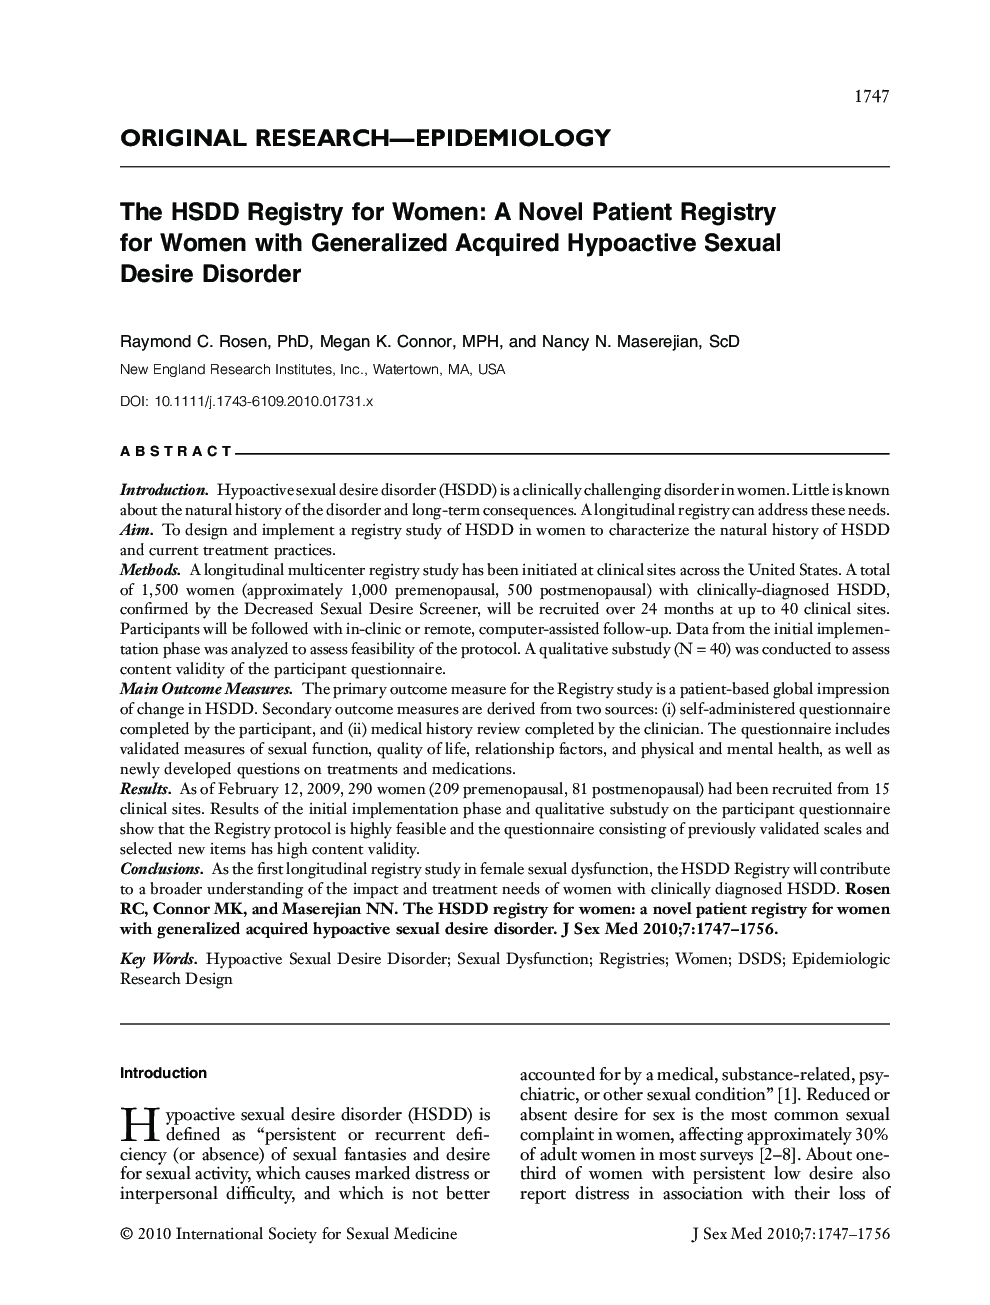 ORIGINAL RESEARCH-EPIDEMIOLOGY: The HSDD Registry for Women: A Novel Patient Registry for Women with Generalized Acquired Hypoactive Sexual Desire Disorder